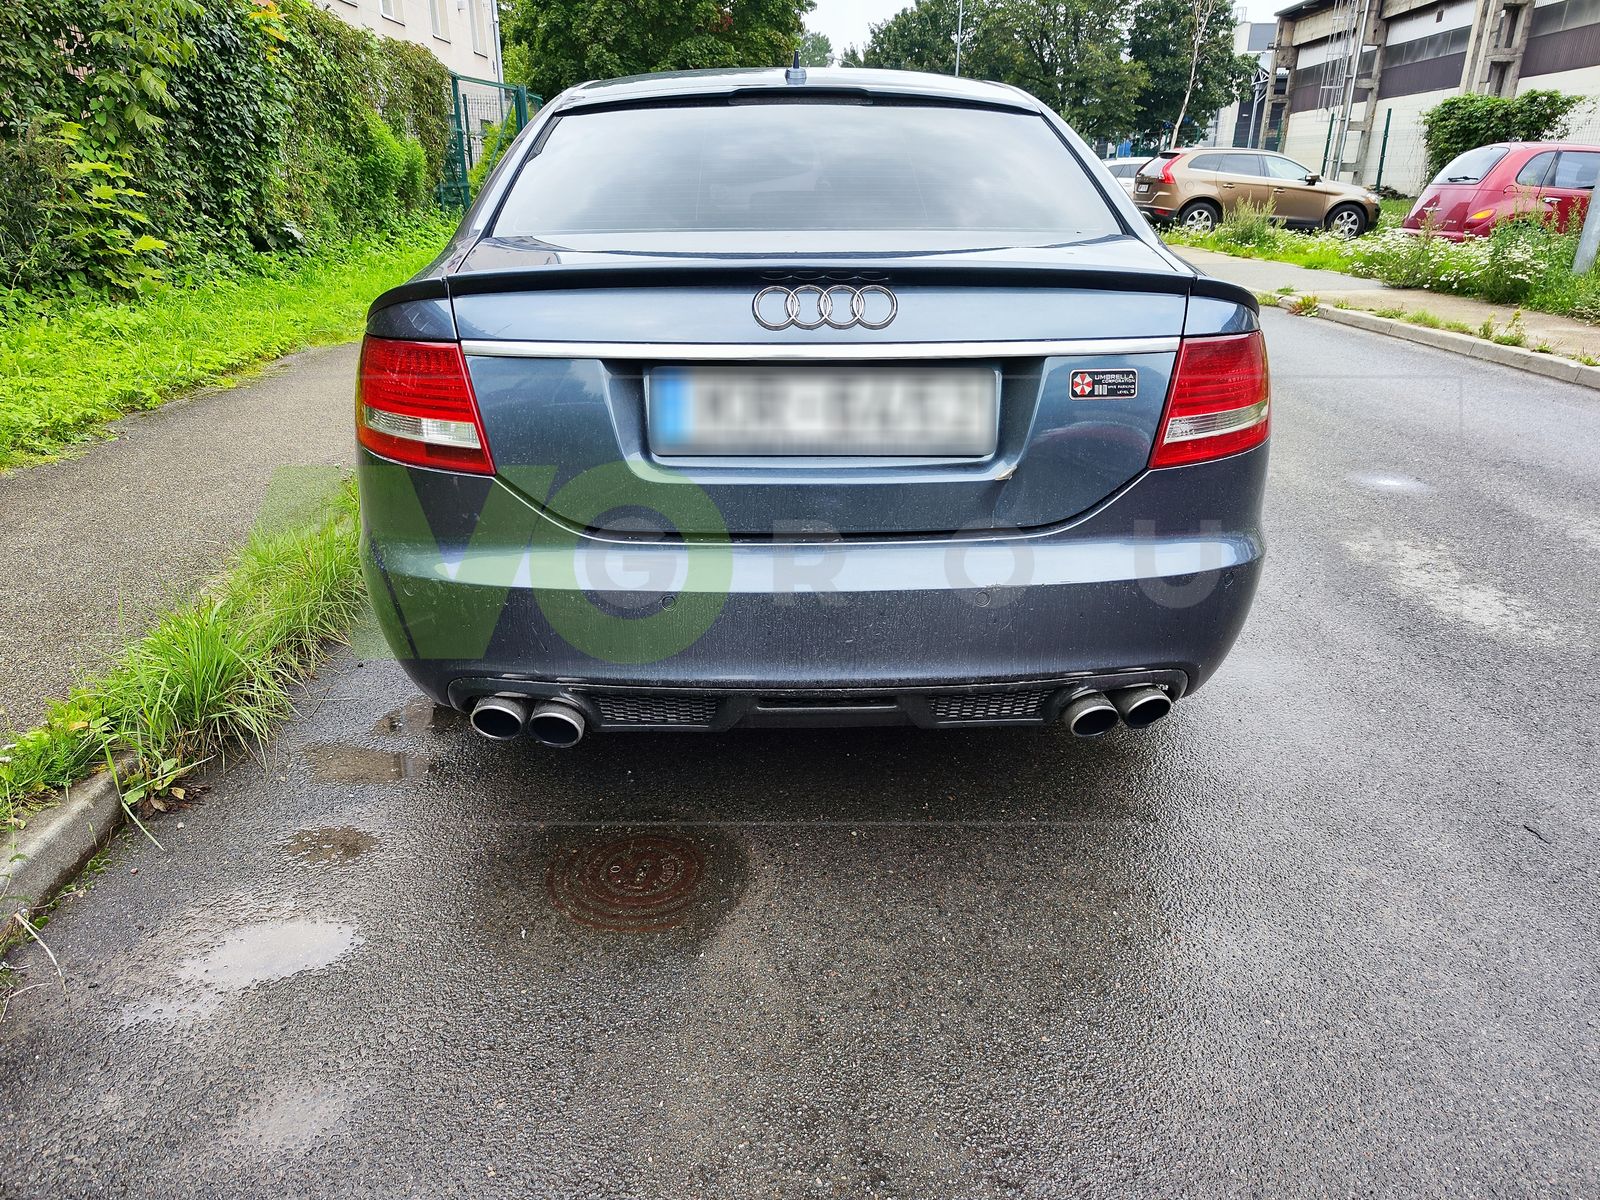 A Style rear bumper performance diffuser for AUDI A6 C6 4F 2004-2008